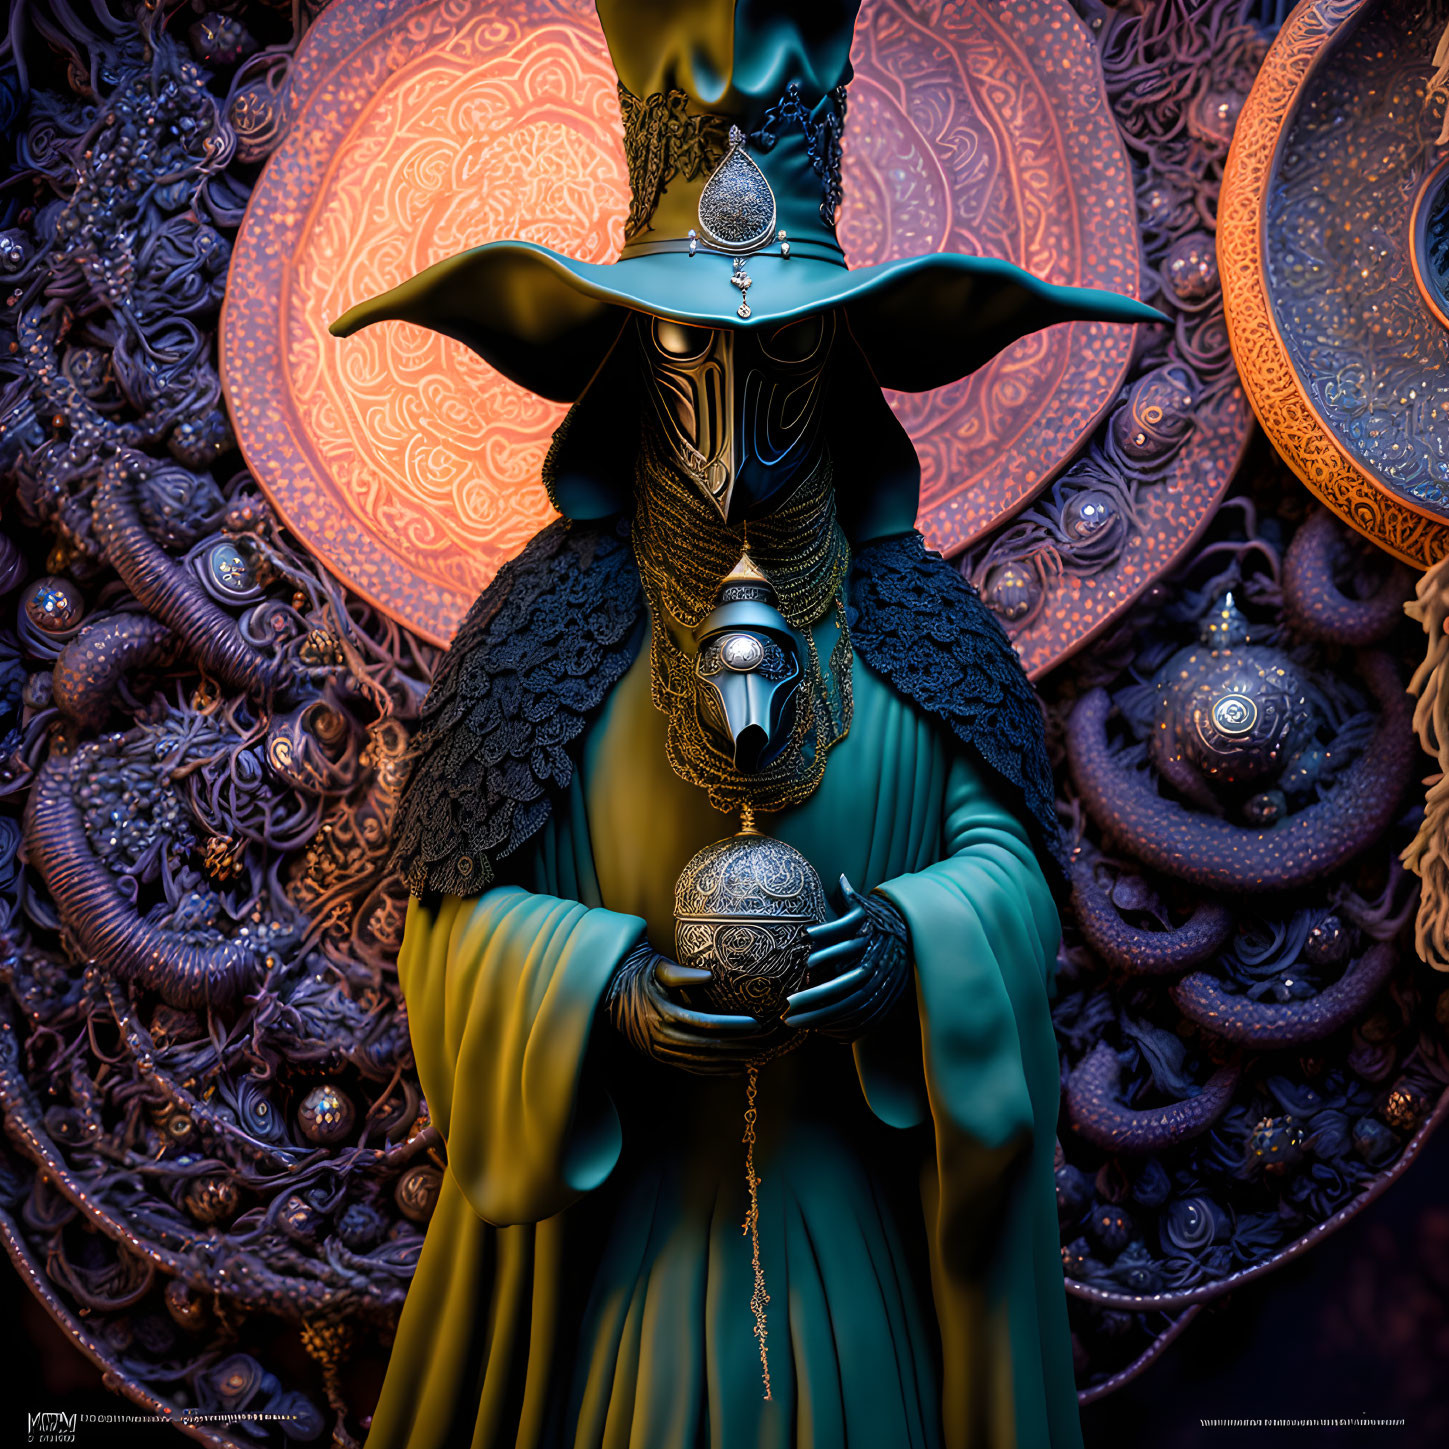 Mystical figure in green cloak with ornate hat holding spherical object in fantastical setting